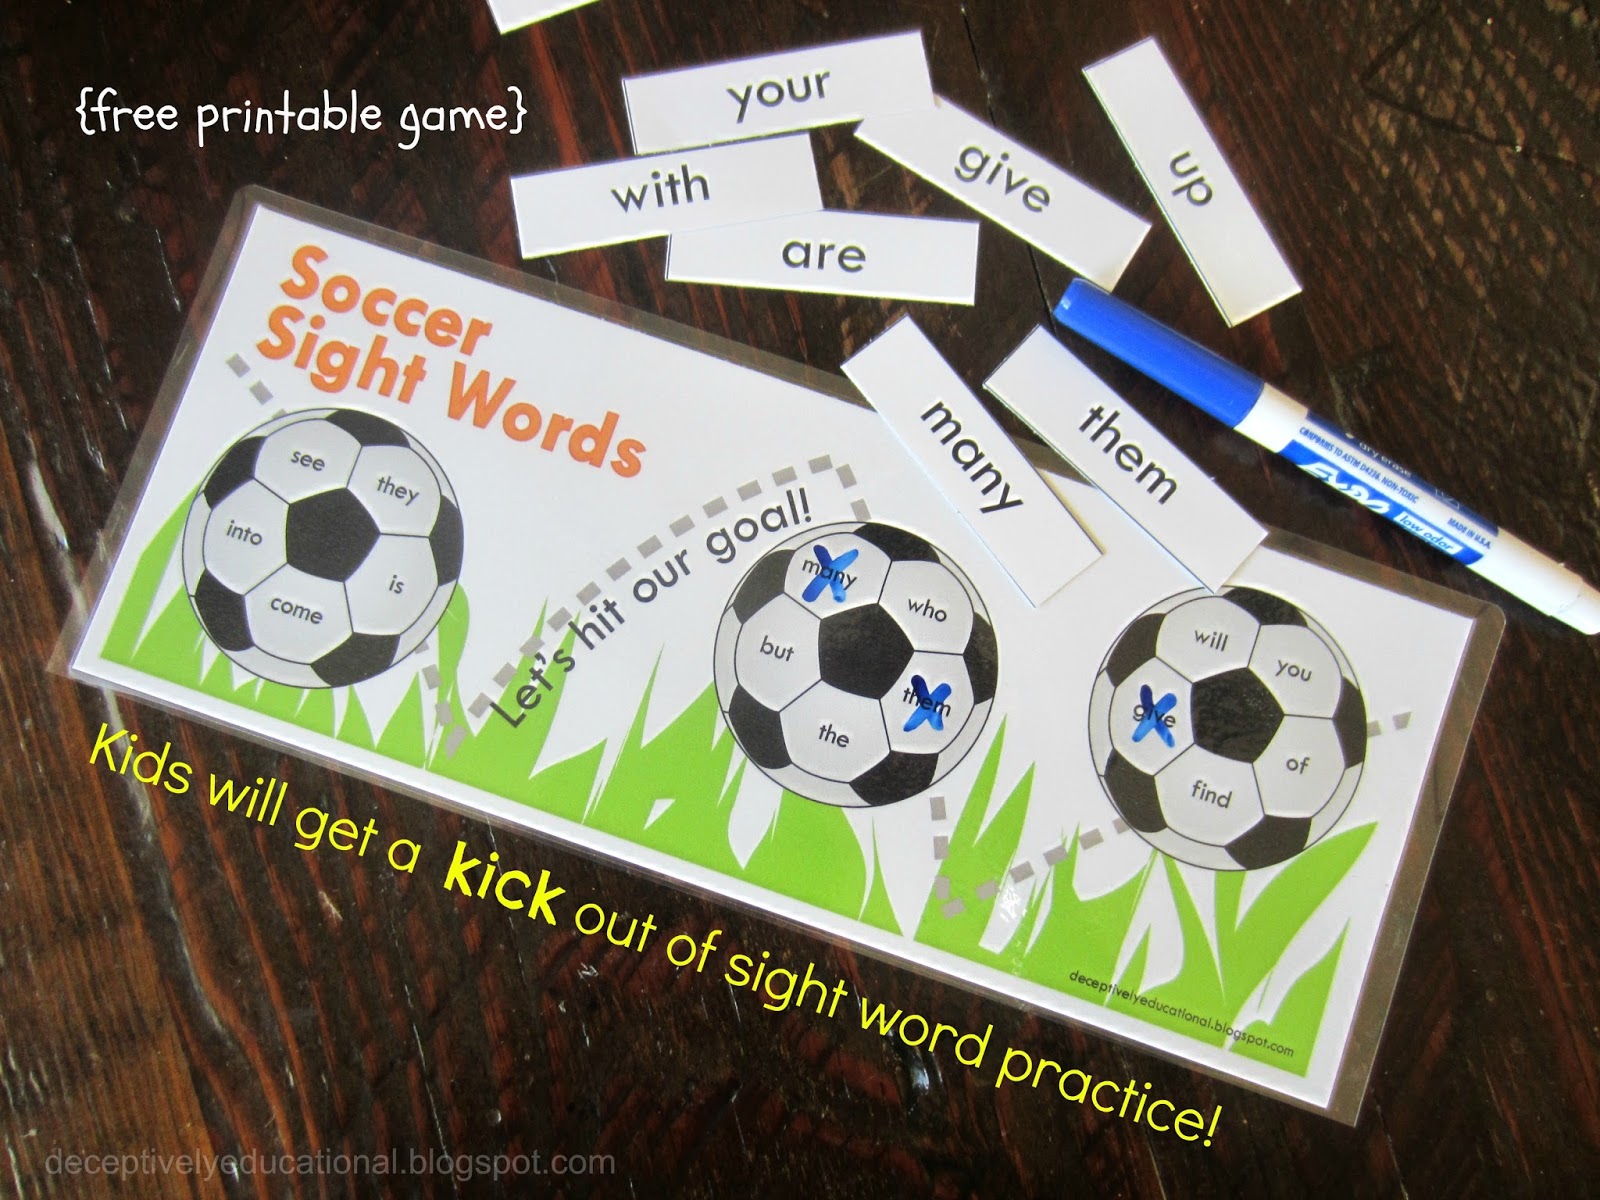 Relentlessly Fun, Deceptively Educational Soccer Sight Words (free printable game)